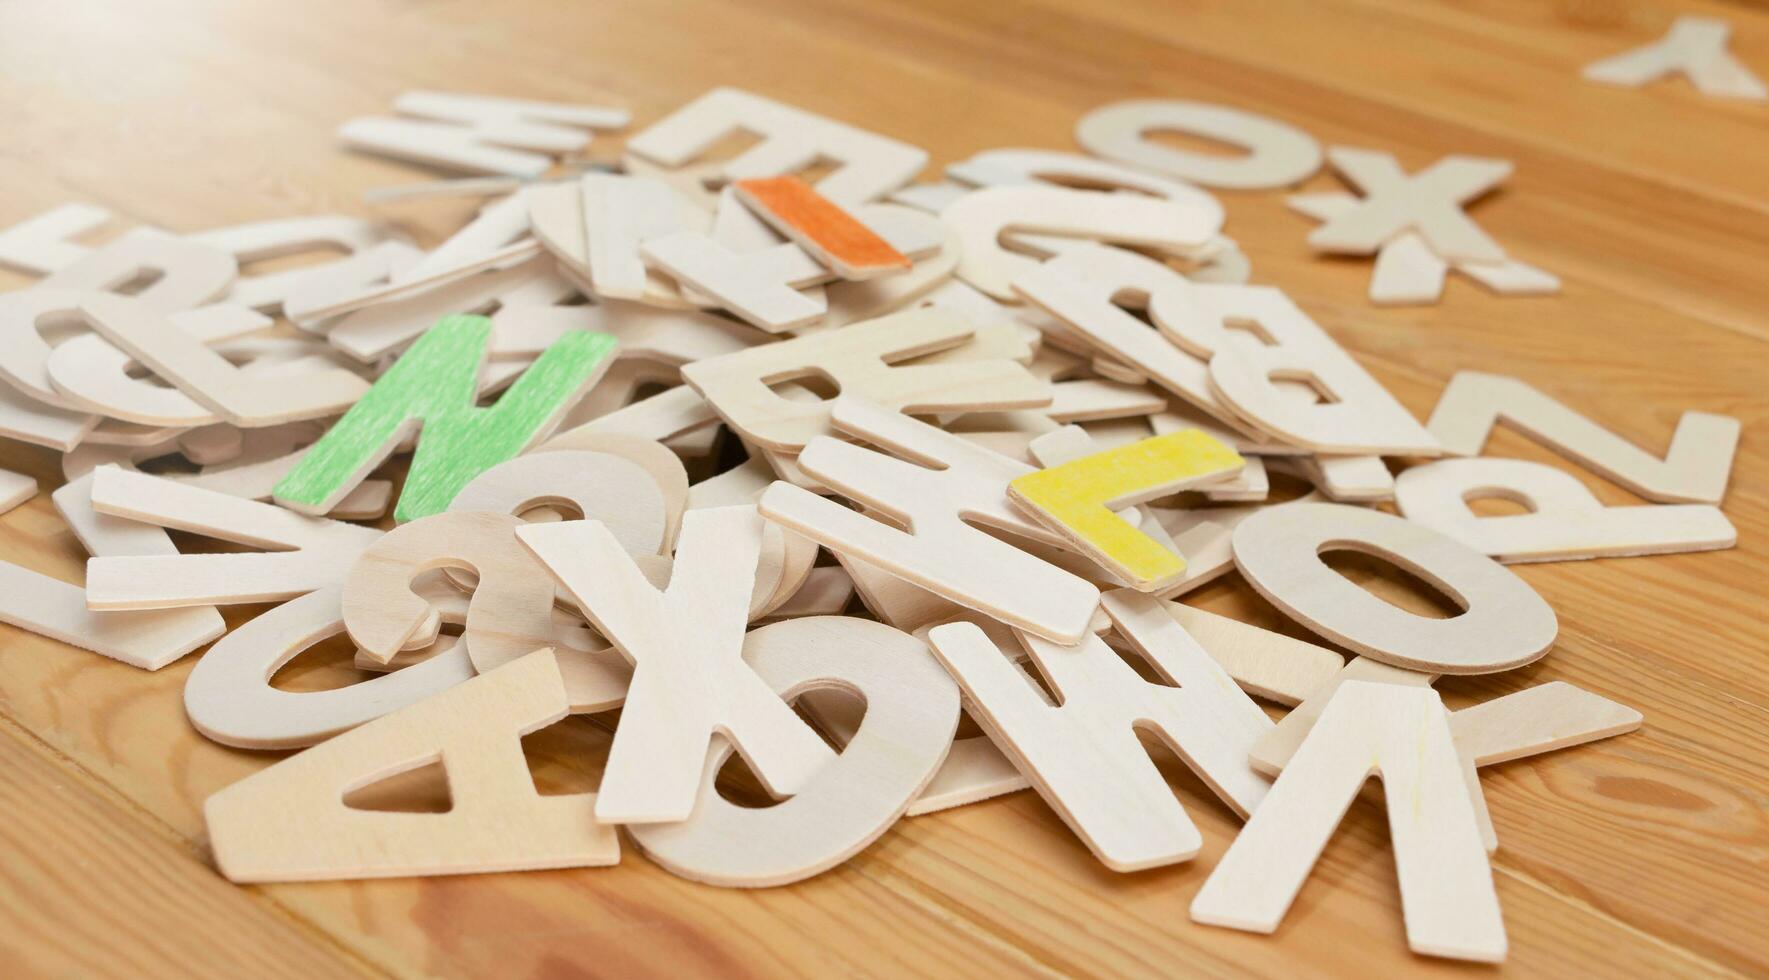 English wood alphabets on wooden table photo